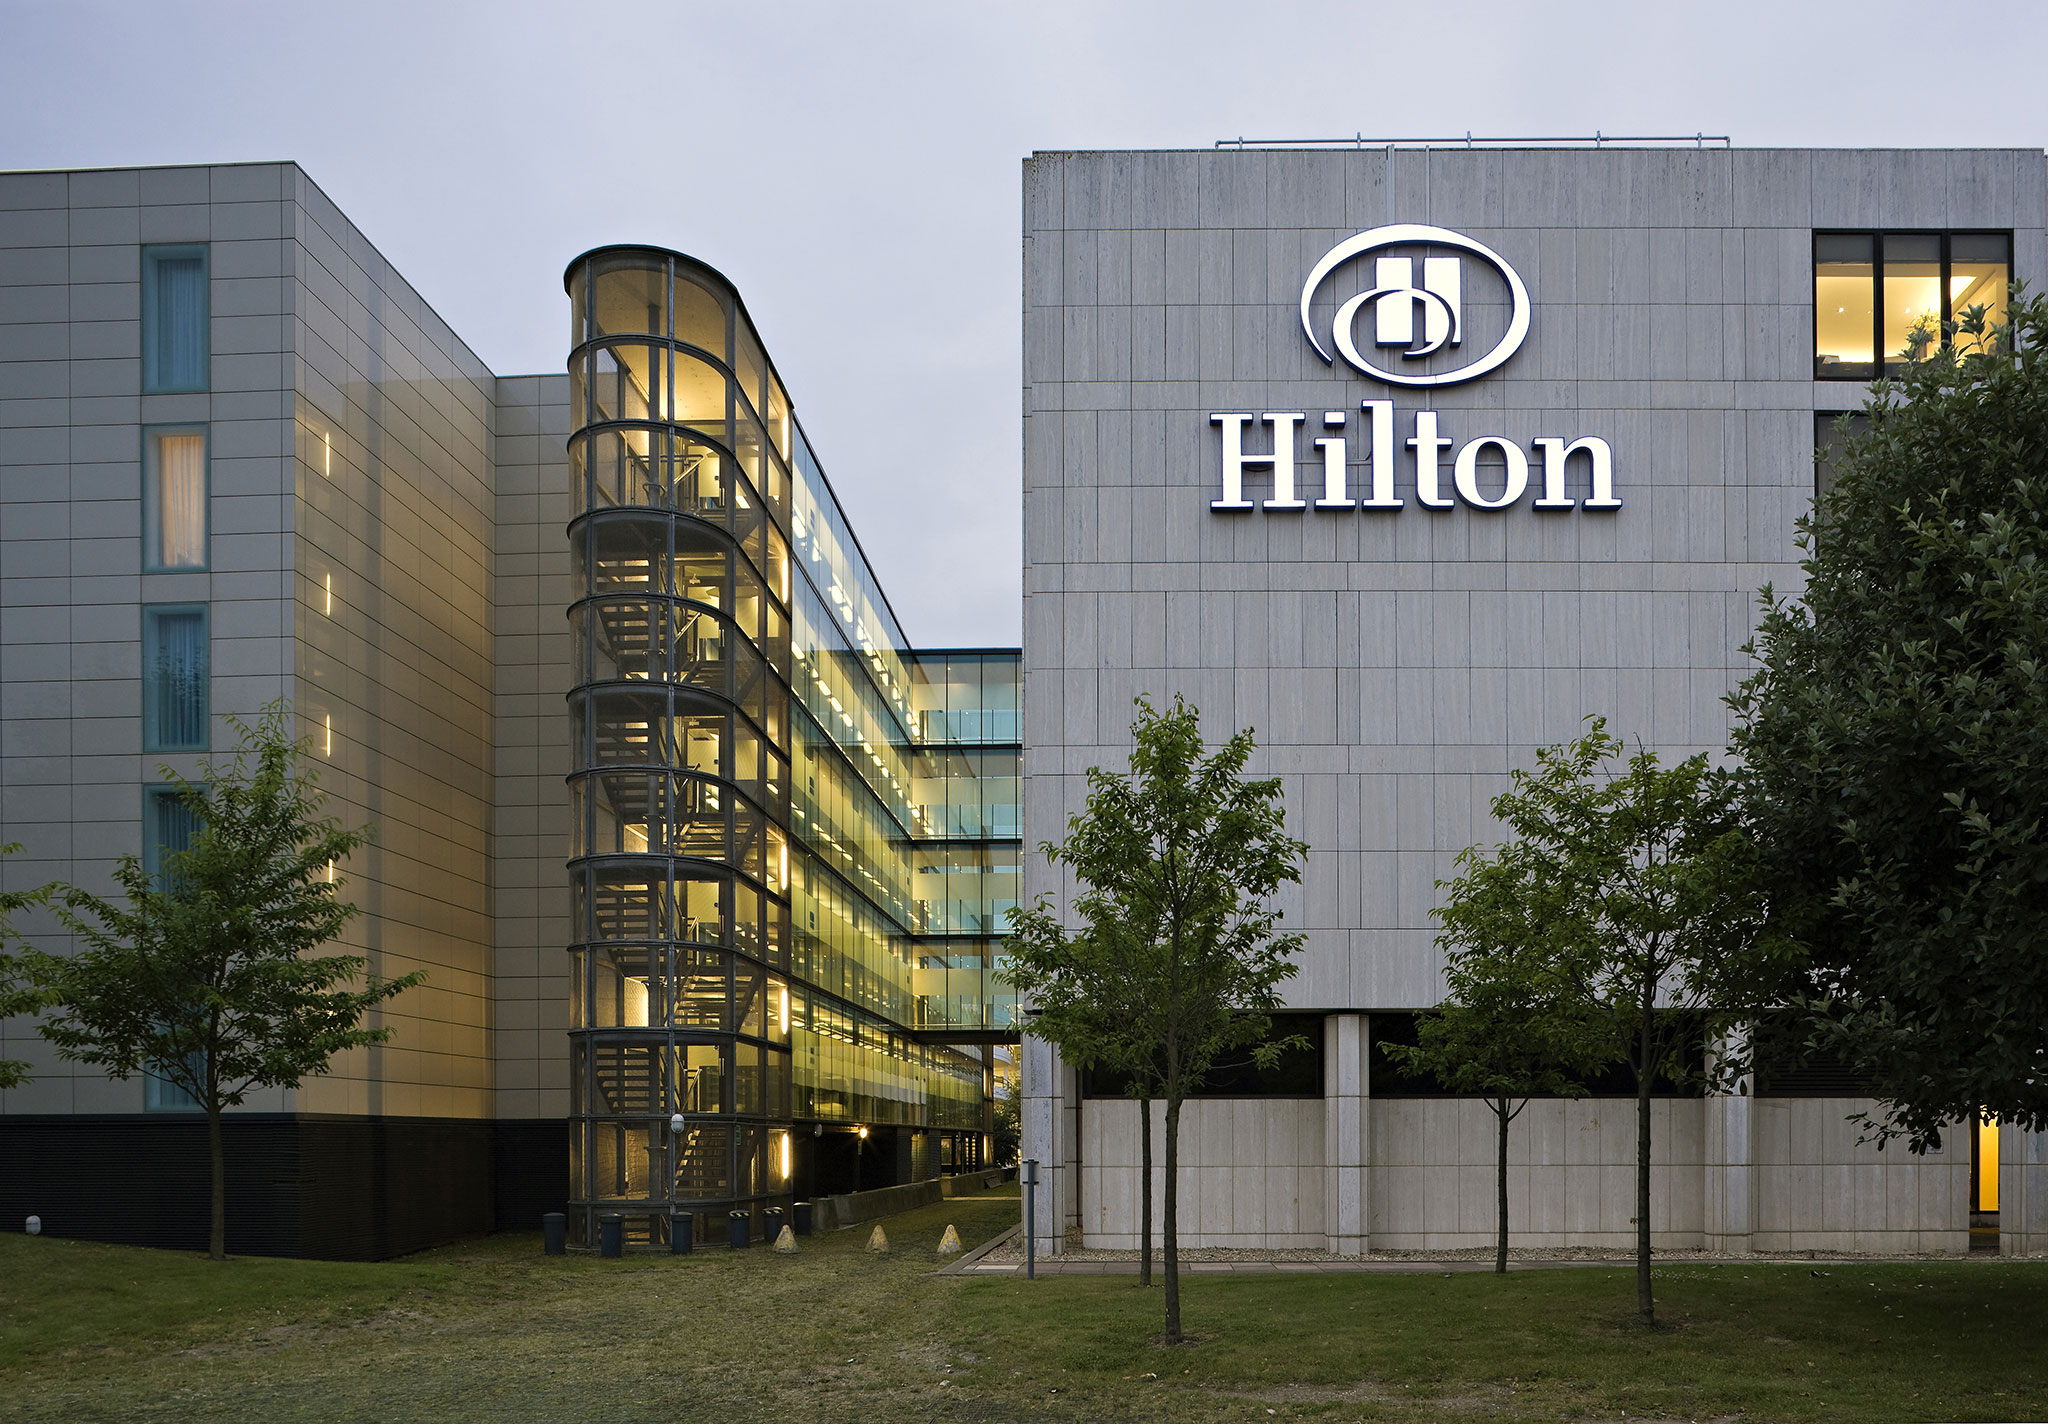 Hilton will add 100 hotels in Africa Over Five Years